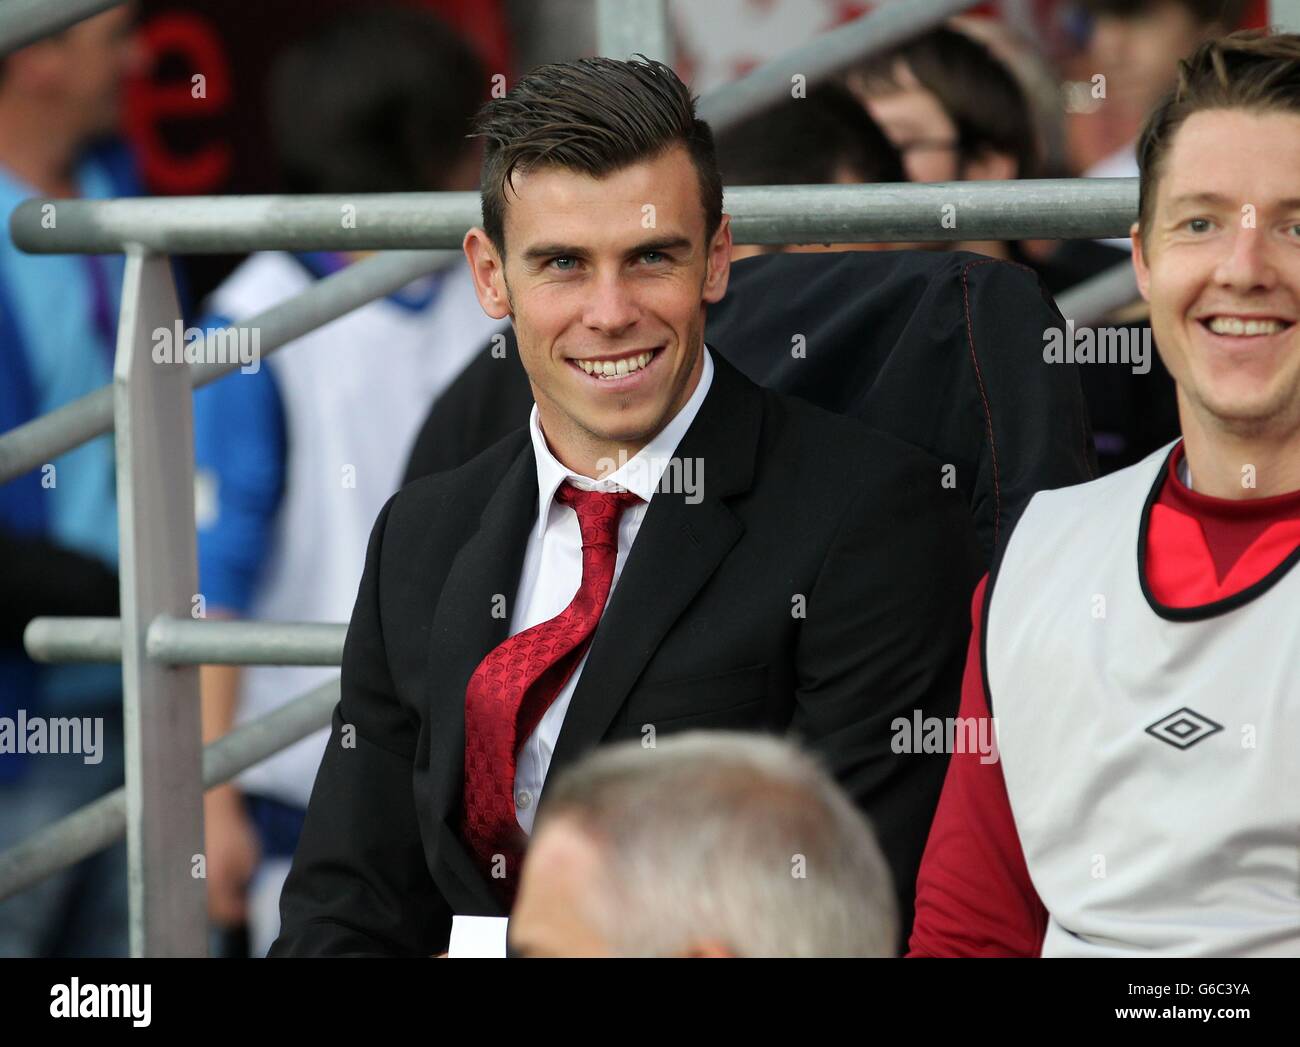 Soccer - Vauxhall International Friendly - Wales v Republic of Ireland - Cardiff City Stadium. Gareth Bale takes his place on the bench for the International Friendly at Cardiff City Stadium, Cardiff. Stock Photo